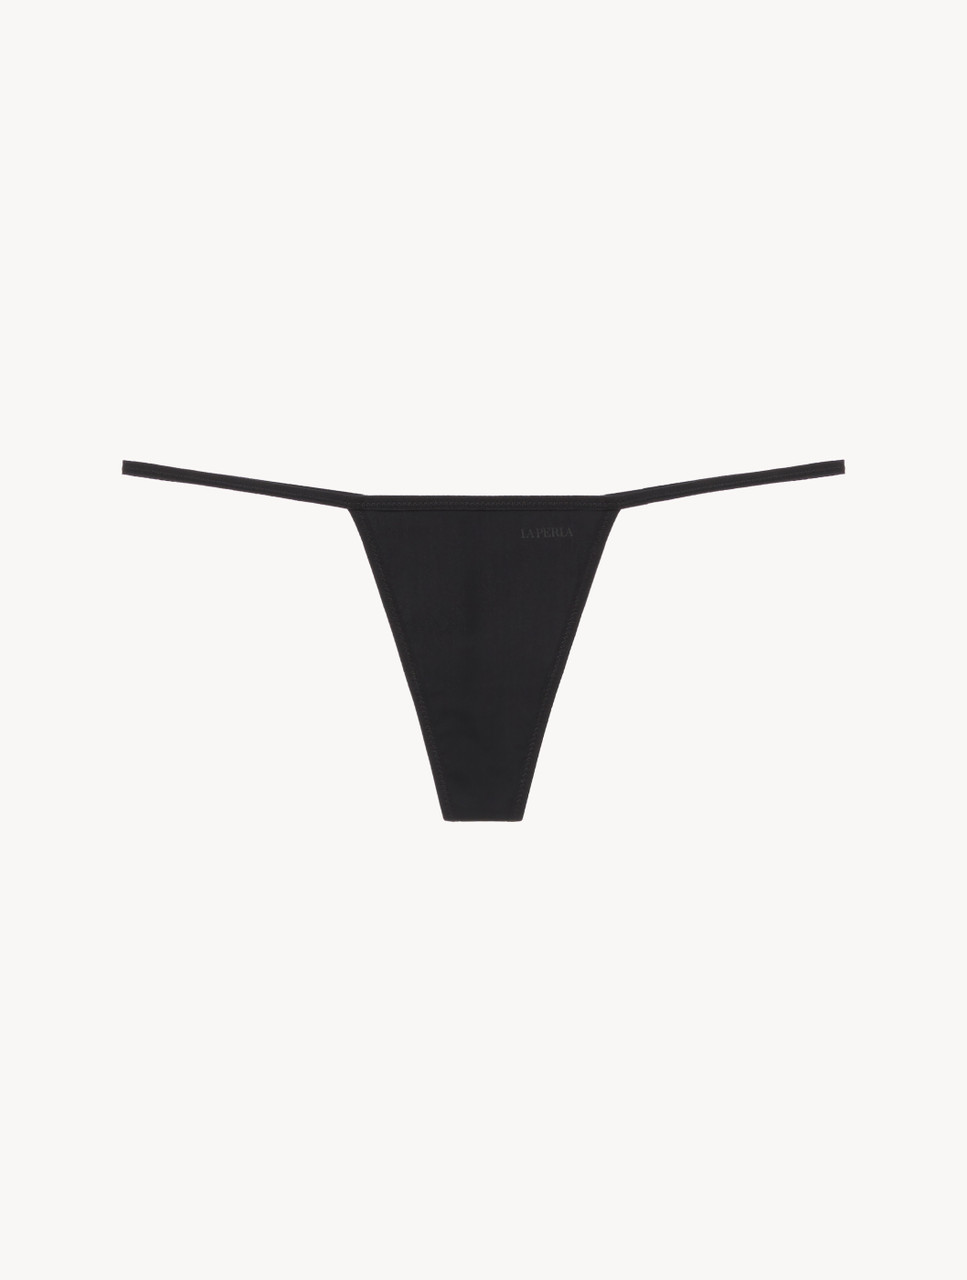 Invisible Panty Lines G String - 6 Pack by B Free Intimate Apparel Online, THE ICONIC